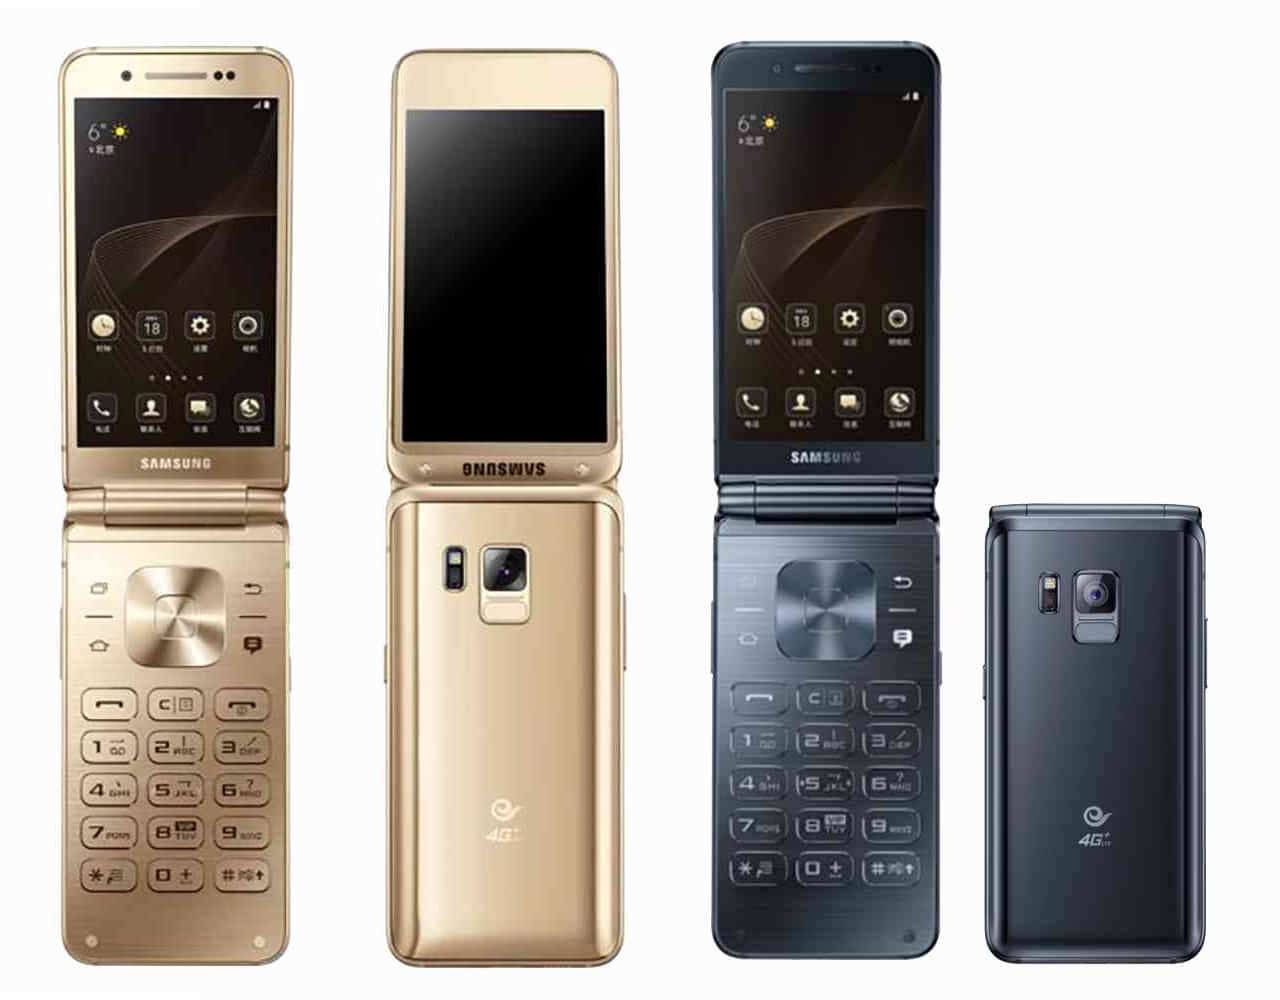 Samsung W2017 gold and black